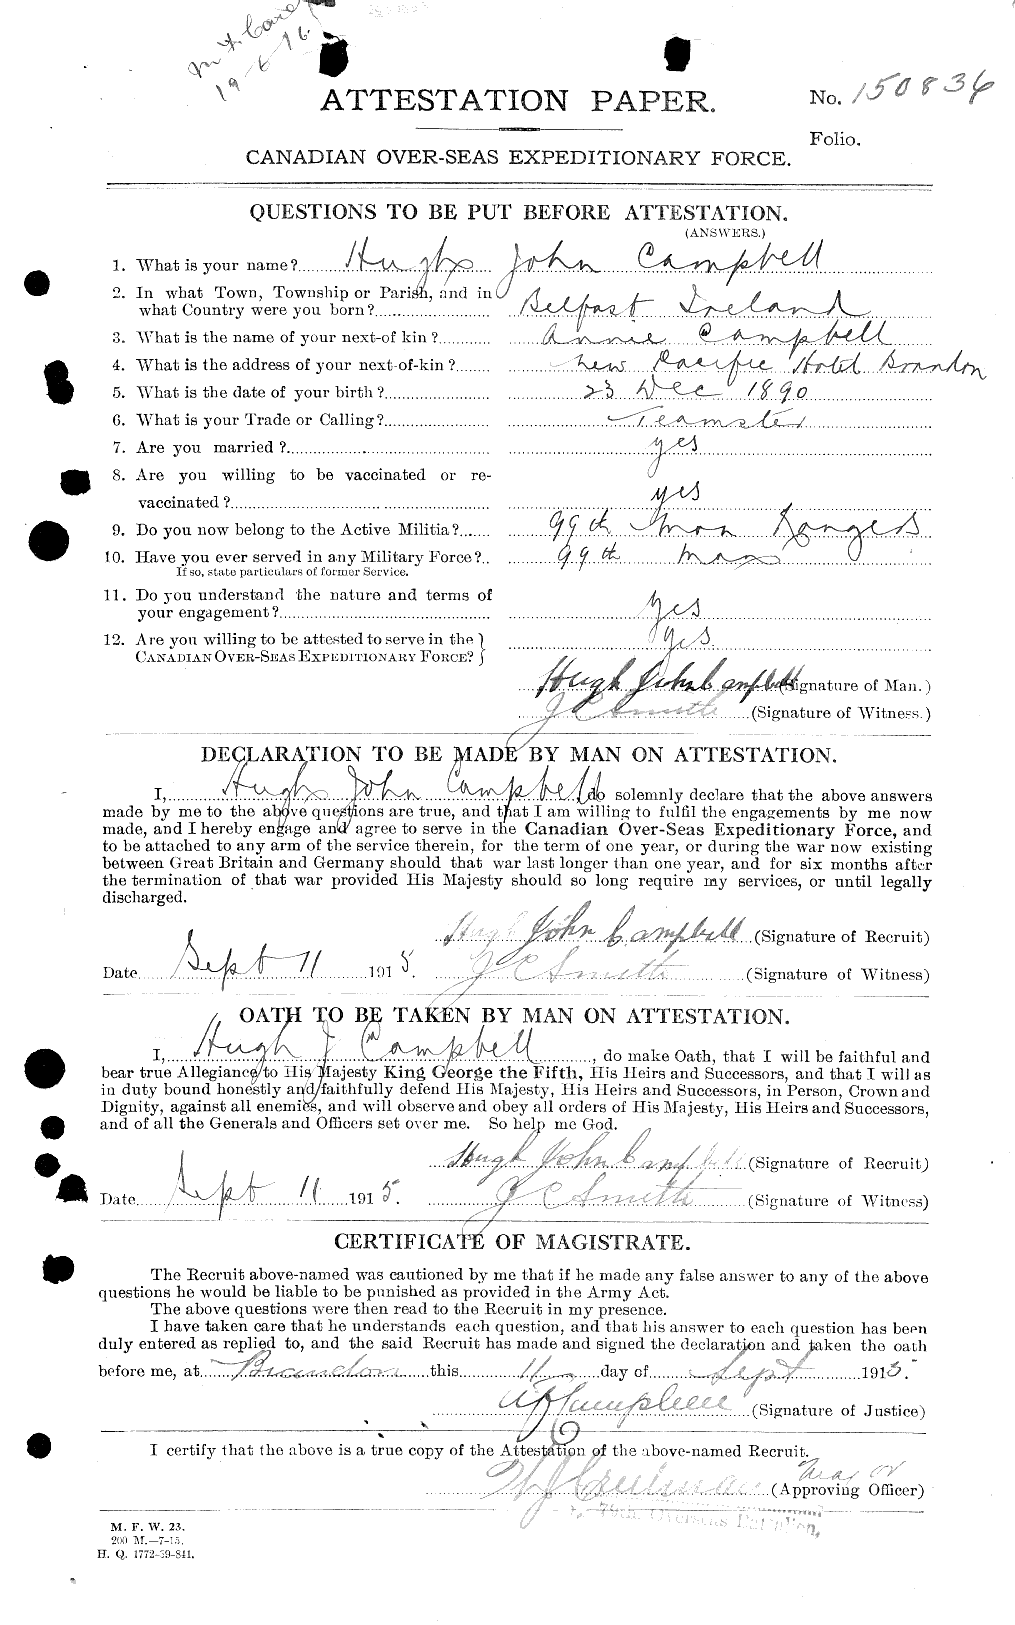 Personnel Records of the First World War - CEF 002732a